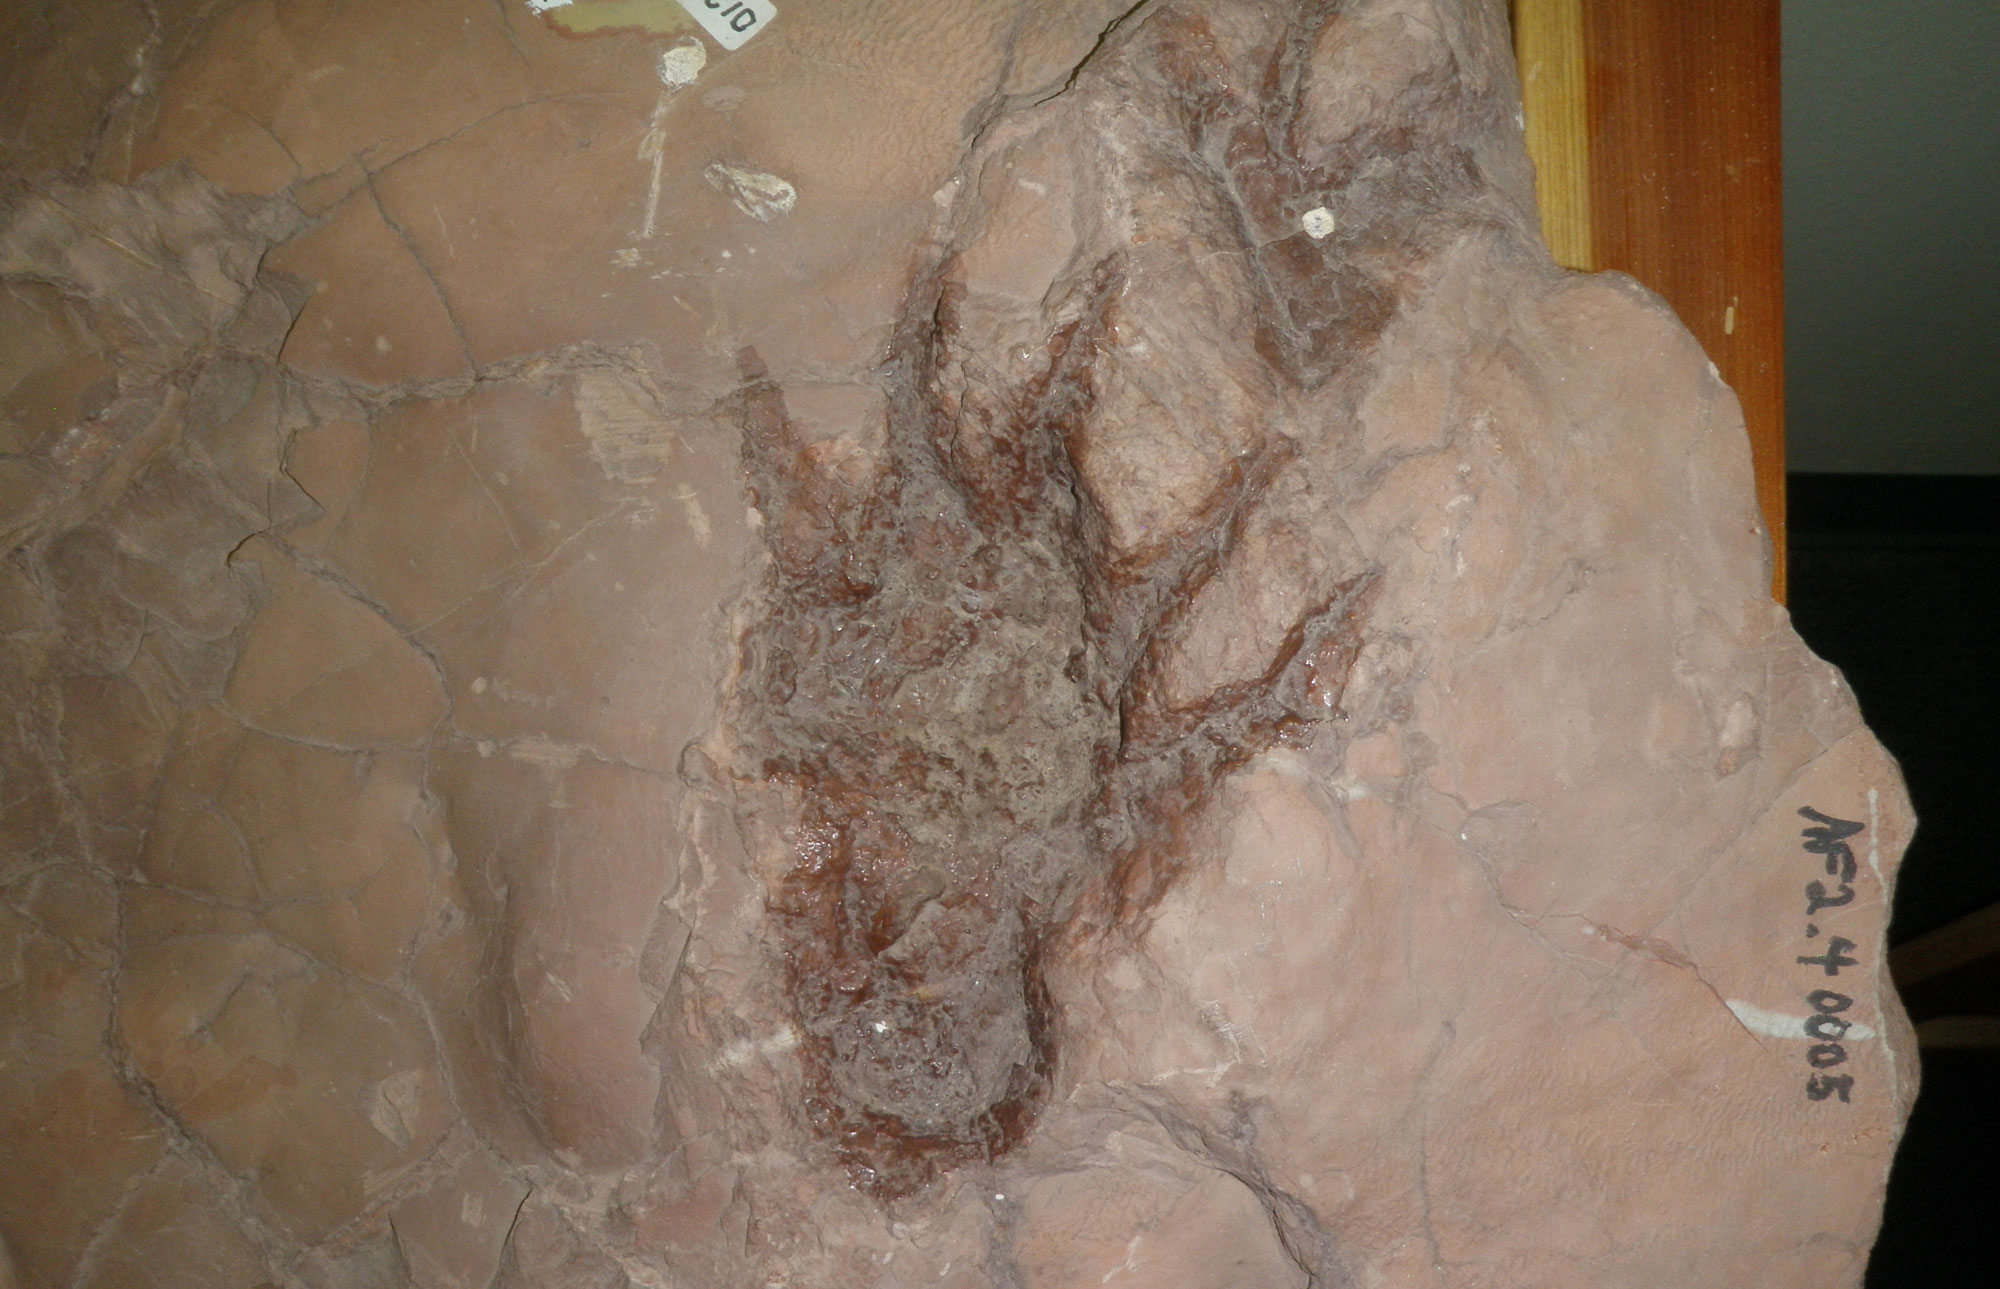 Photograph of a elongated, five-toed footprint in brownish rock on display at a visitor center. In front of the footprint is an impression that might be another footprint. The footprints are Permian in age and may belong to Dimetrodon.